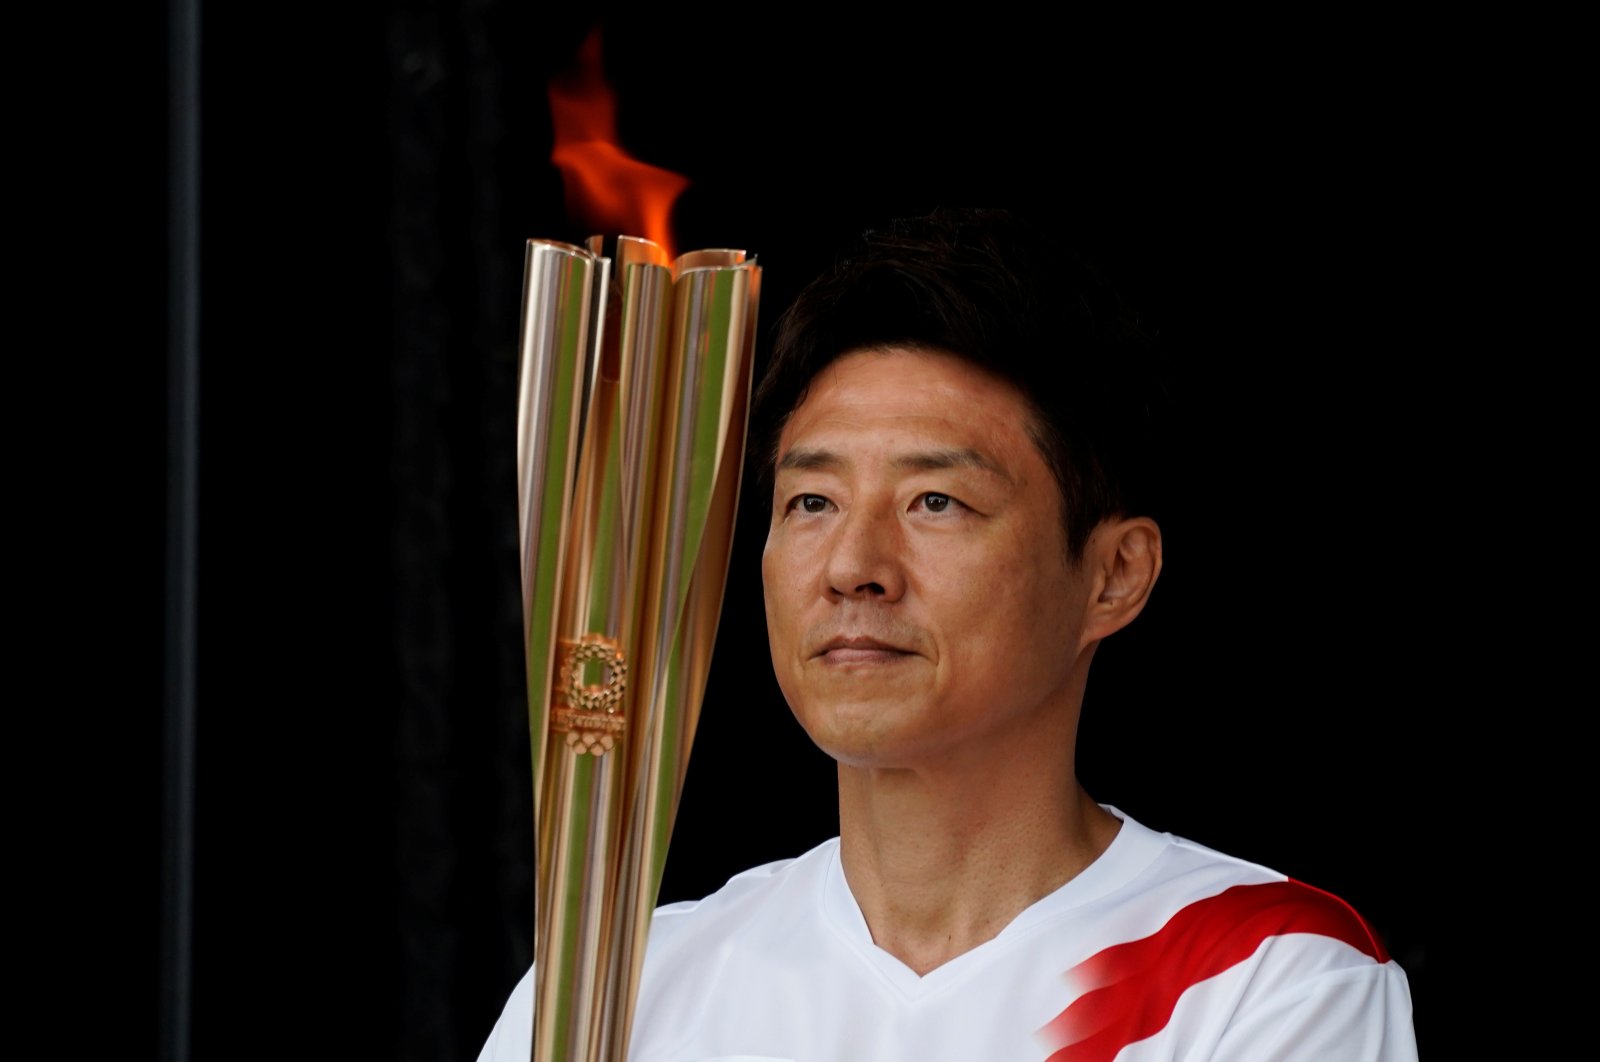 Shuzo Matsuoka, Tokyo's first torchbearer, holds the torch at a lighting ceremony during which torchbearers pass the flame to the next one via a torch kiss, after their relay on a public road was canceled due to the coronavirus pandemic, at the Tokyo 2020 Olympic torch relay celebration in Tokyo, Japan, July 9, 2021. (Reuters Photo)